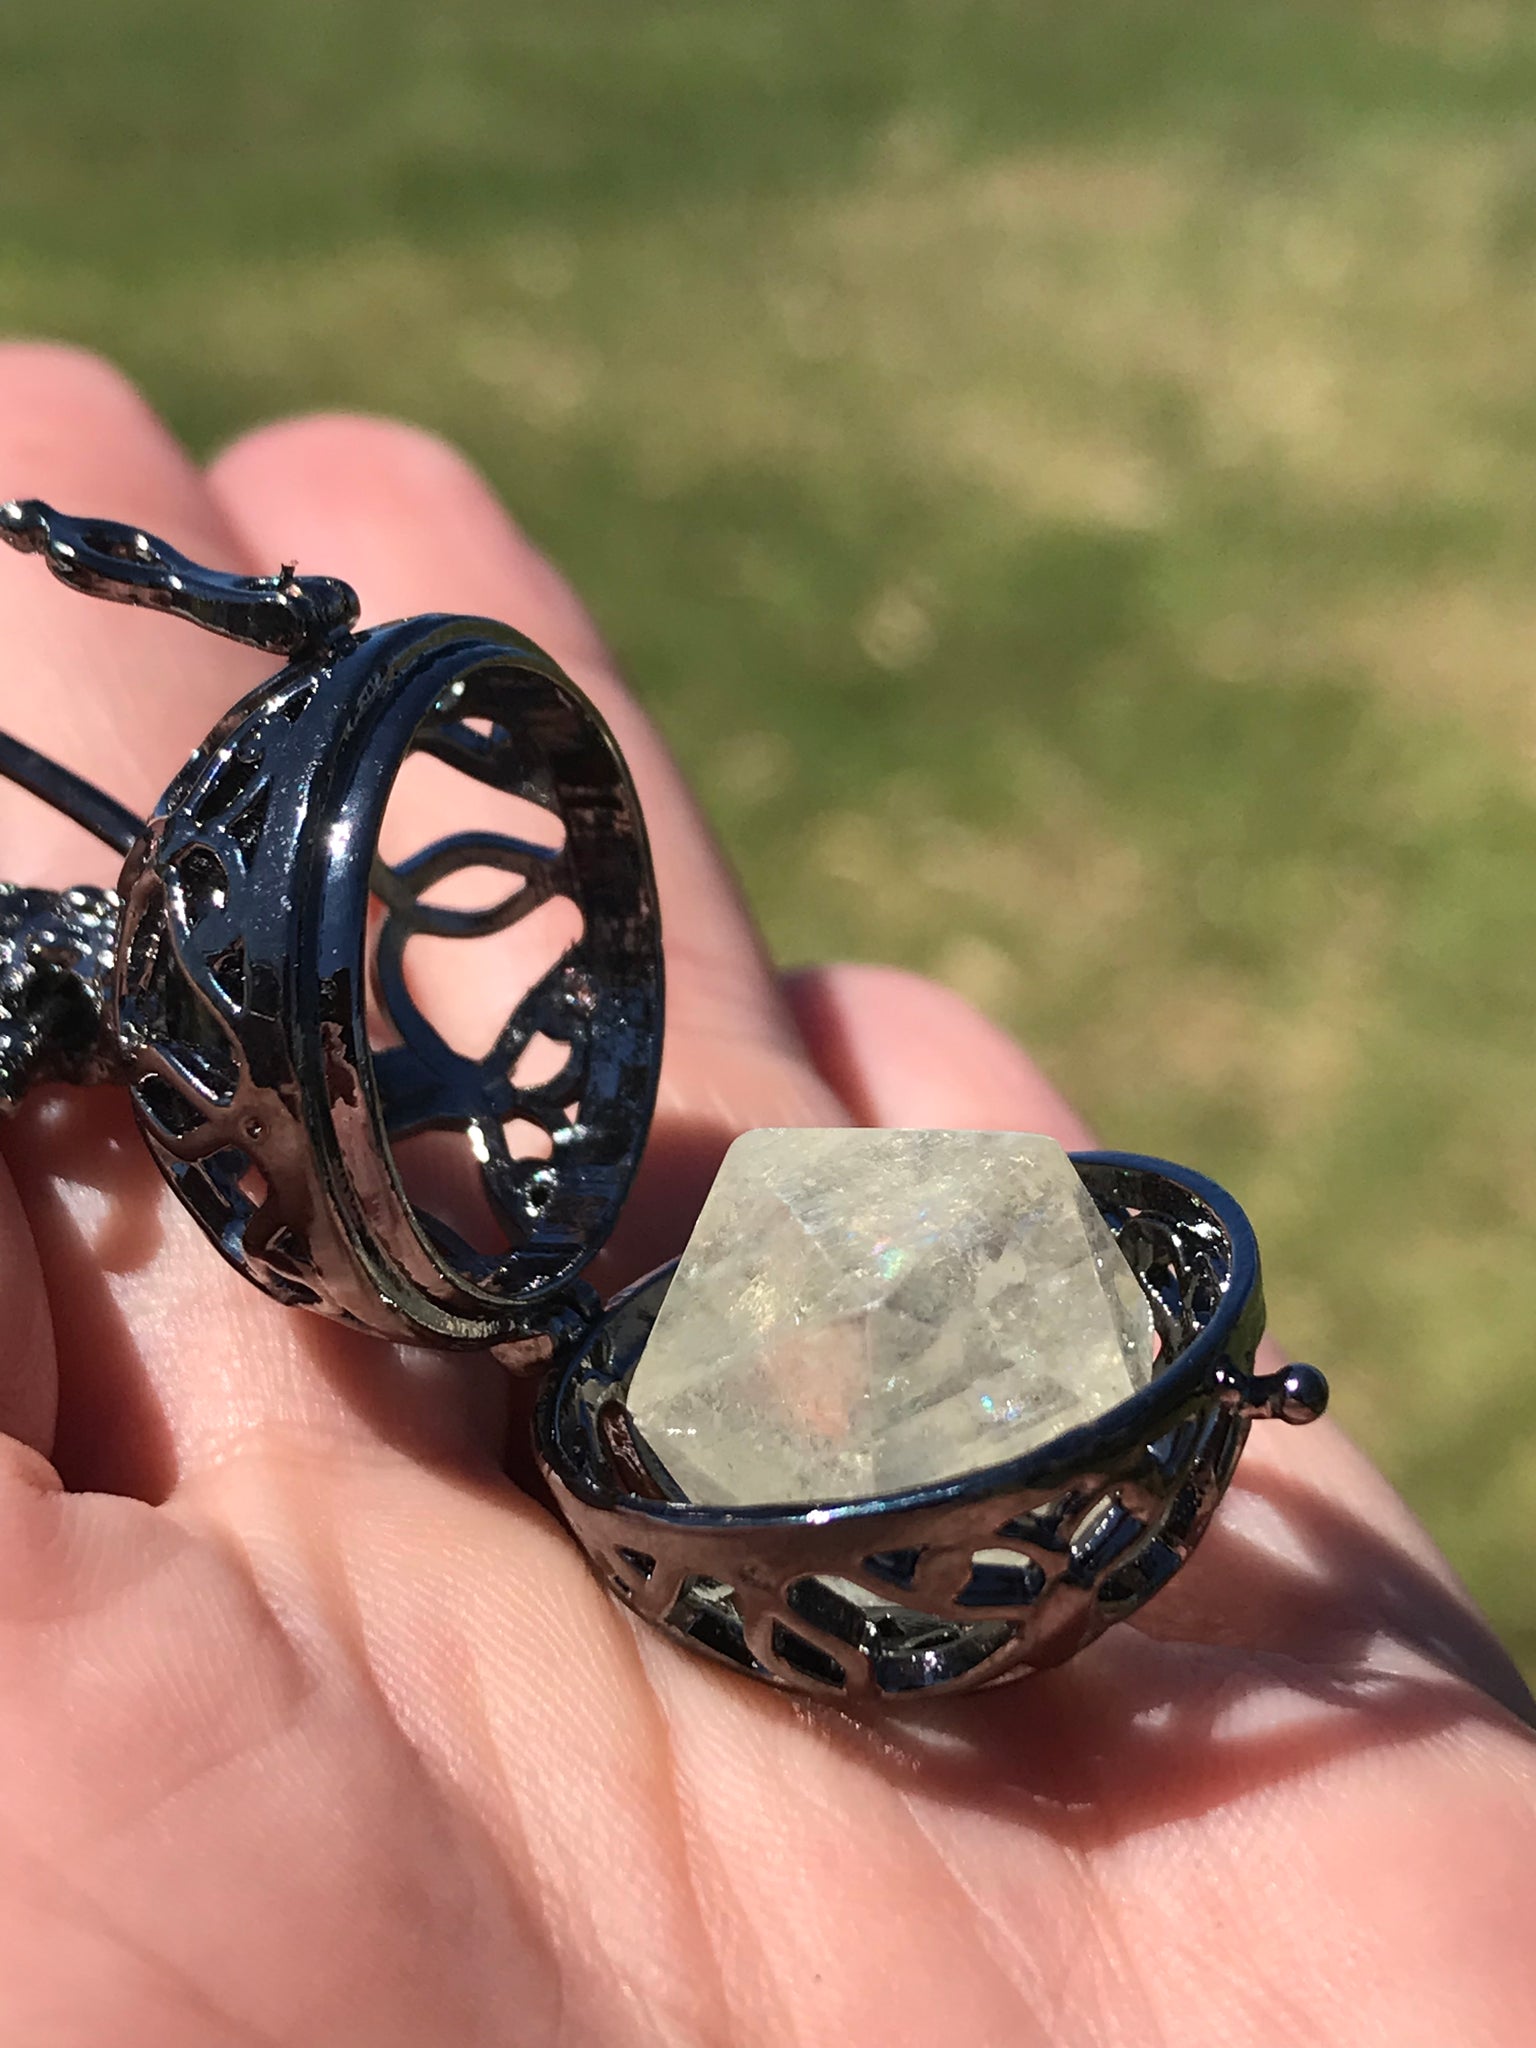 Reserved for Rachele Icosahedron Calcite within metal cage pendant